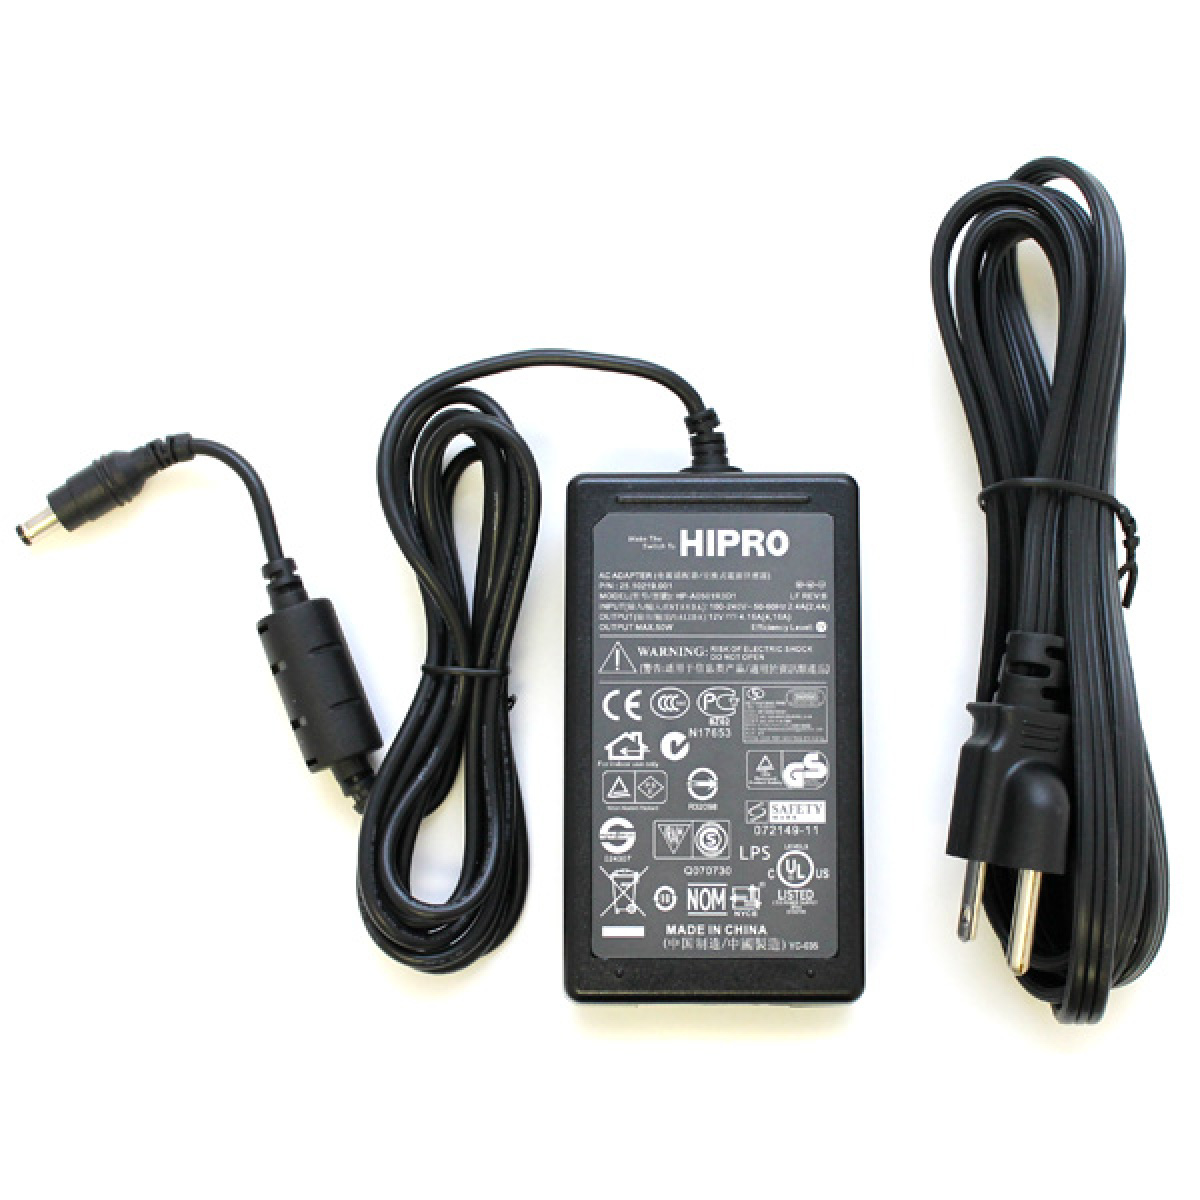 Replacement for HIPRO AC ADAPTER HP-A0501R3D1 12V 4.16A 50W Power Supply